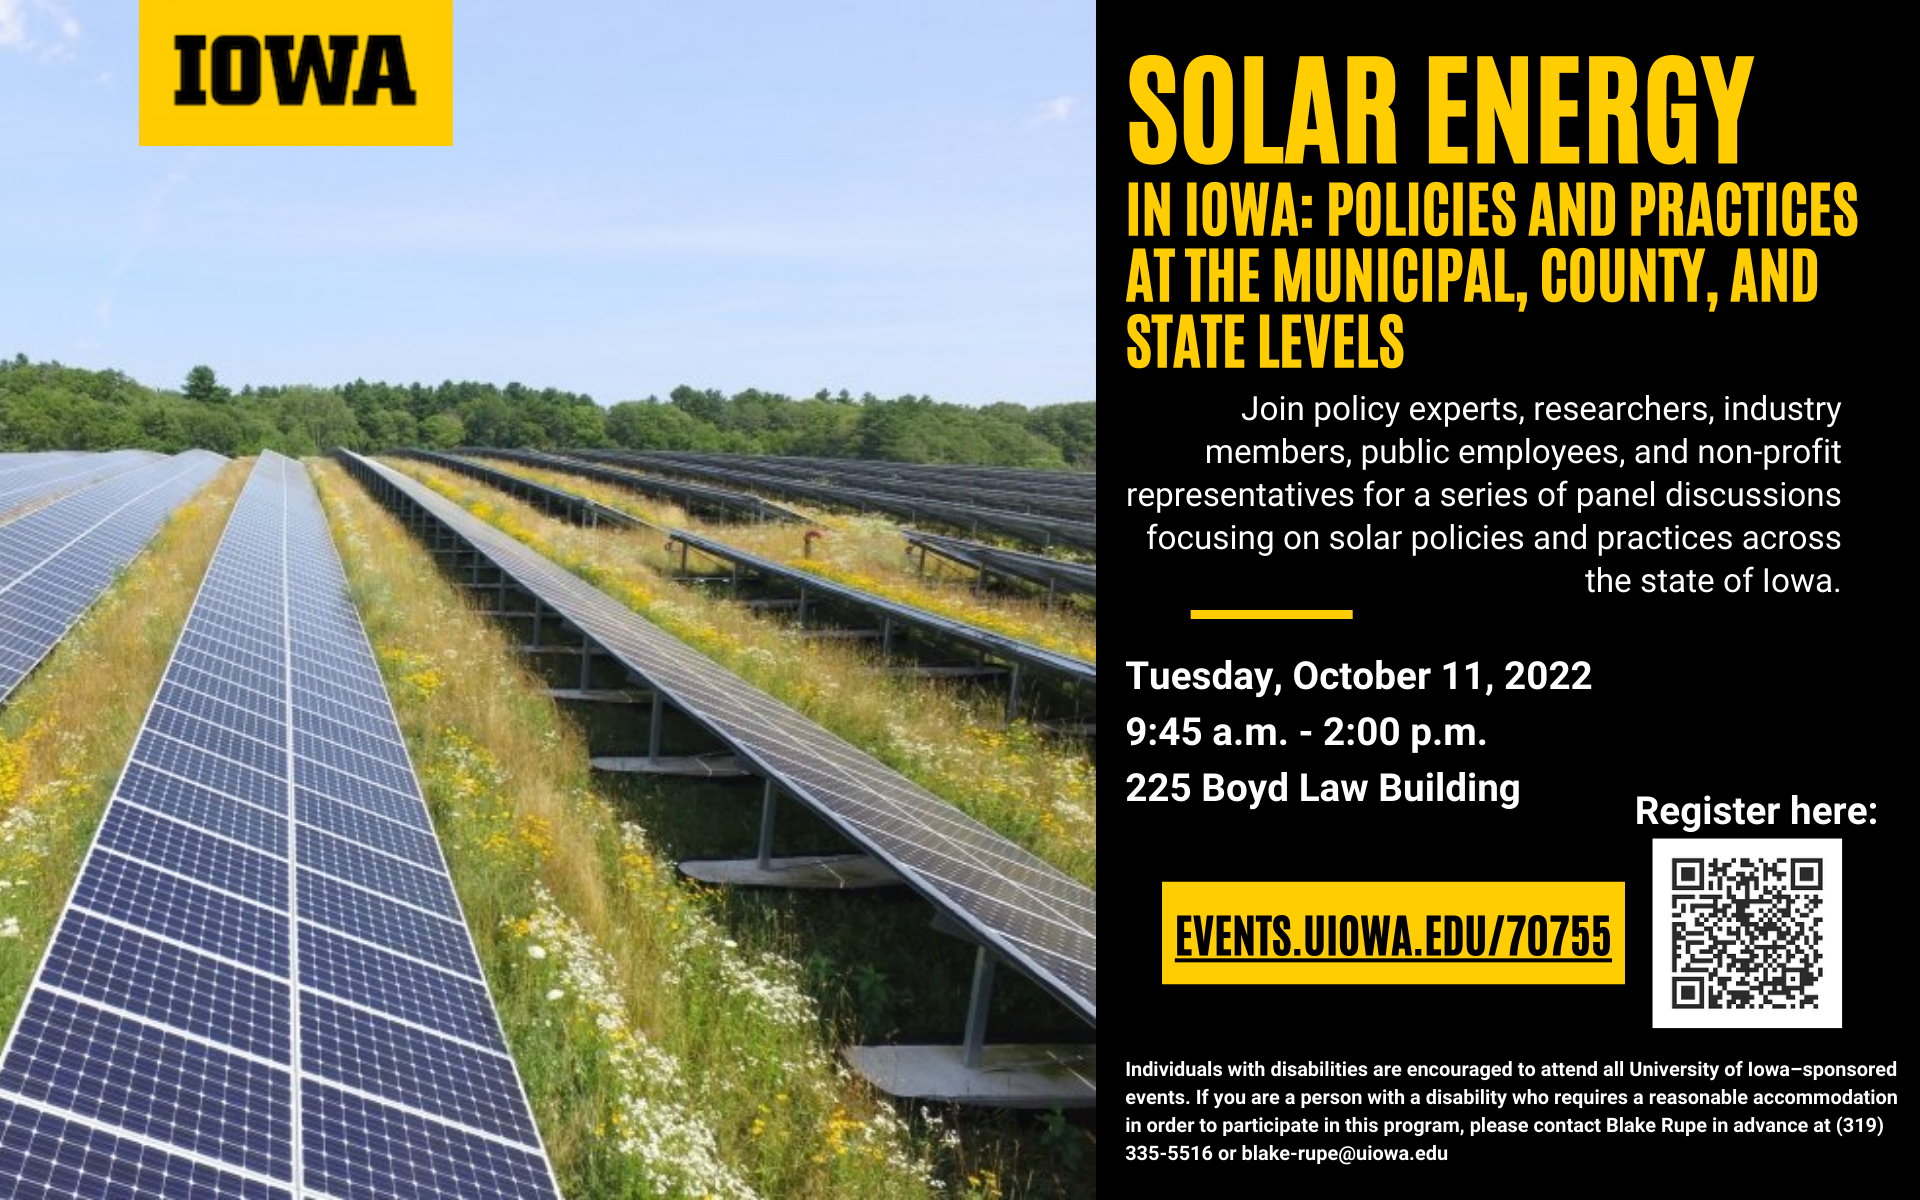 Solar energy In Iowa: Policies and practices at the Municipal, county, and state levels. Join policy experts, researchers, industry members, public employees, and non-profit representatives for a series of panel discussions focusing on solar policies and practices across the state of Iowa.